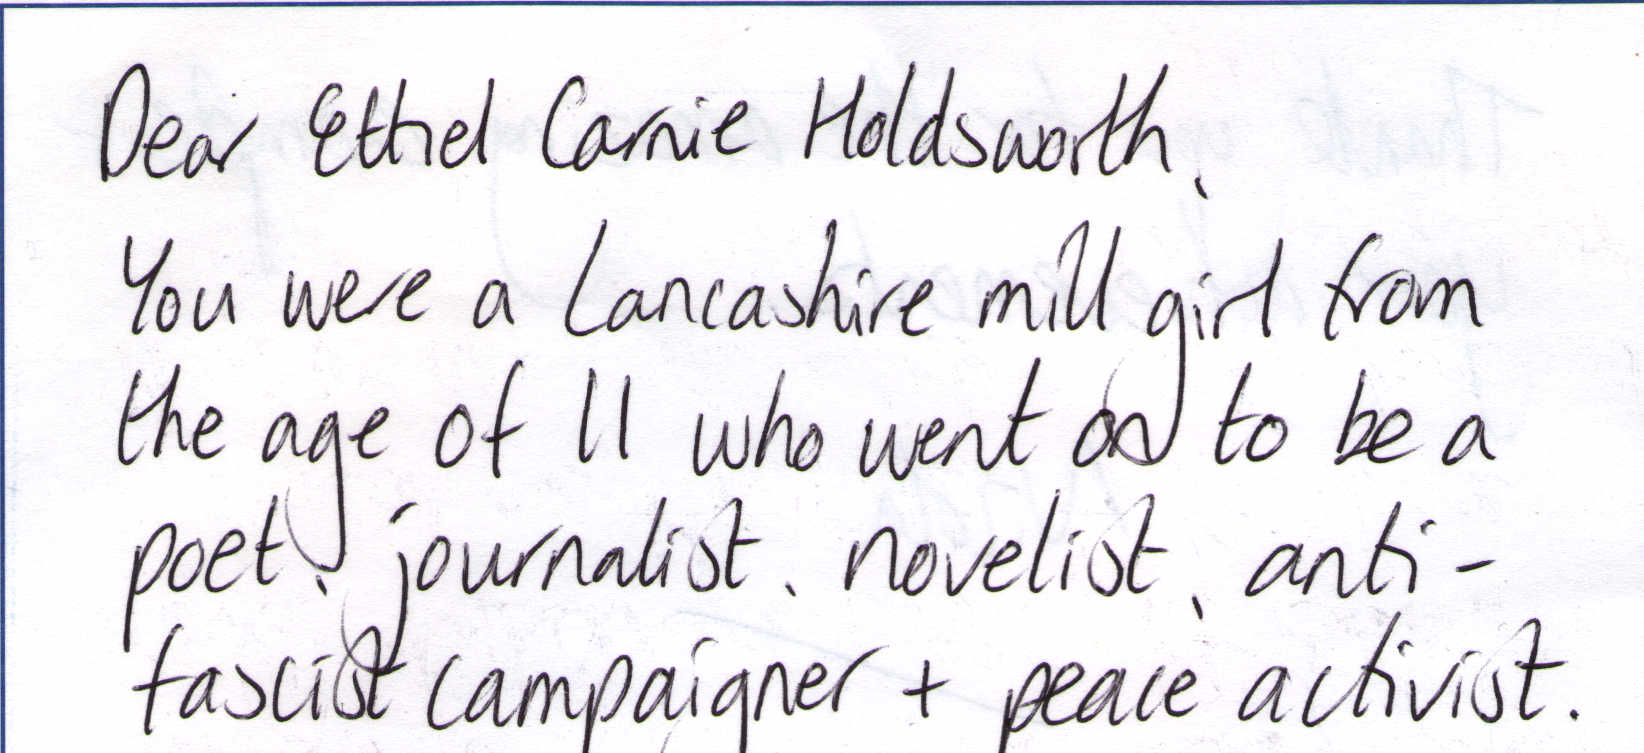 Letter to Ethel Carnie Holdsworth from Nicola Wilson